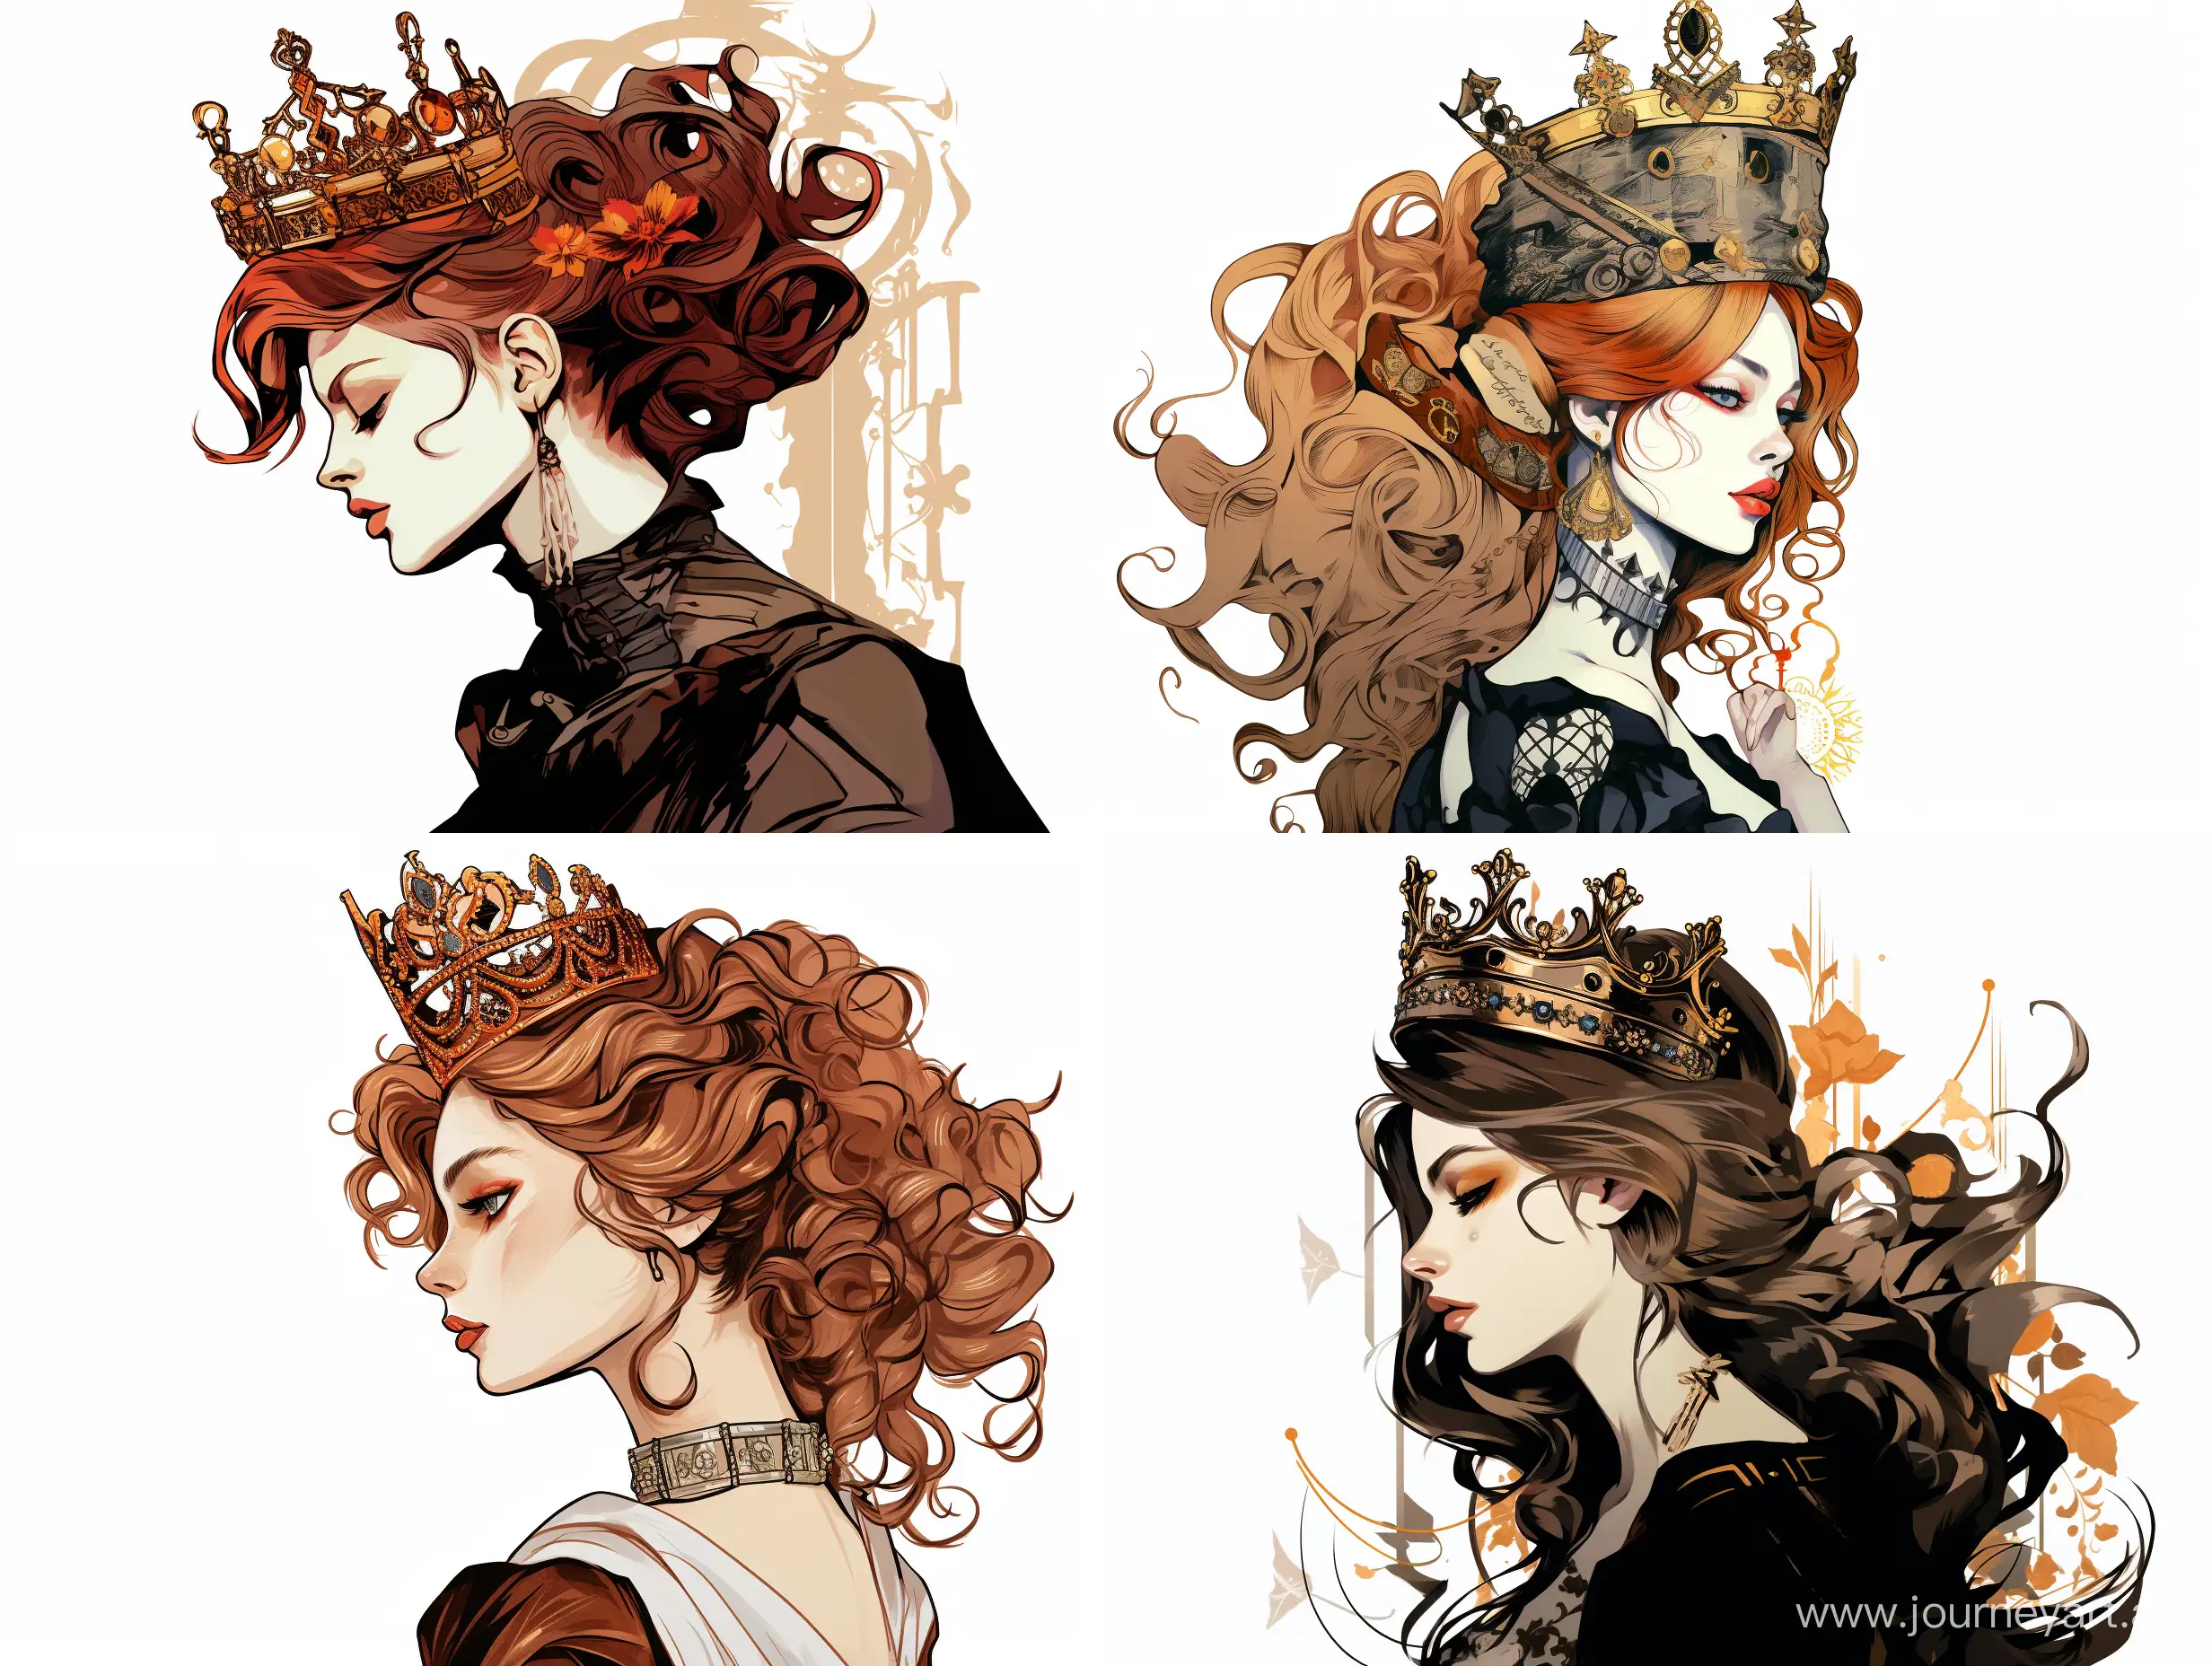 Young Queen looking like Vivienne Westwood, clothing and accessories, by Vivienne Westwood, central portrait in profile, on white background, decorative style, illustration, dark colors, ink stroke, in the style of Alphonse Mucha, cartoon style